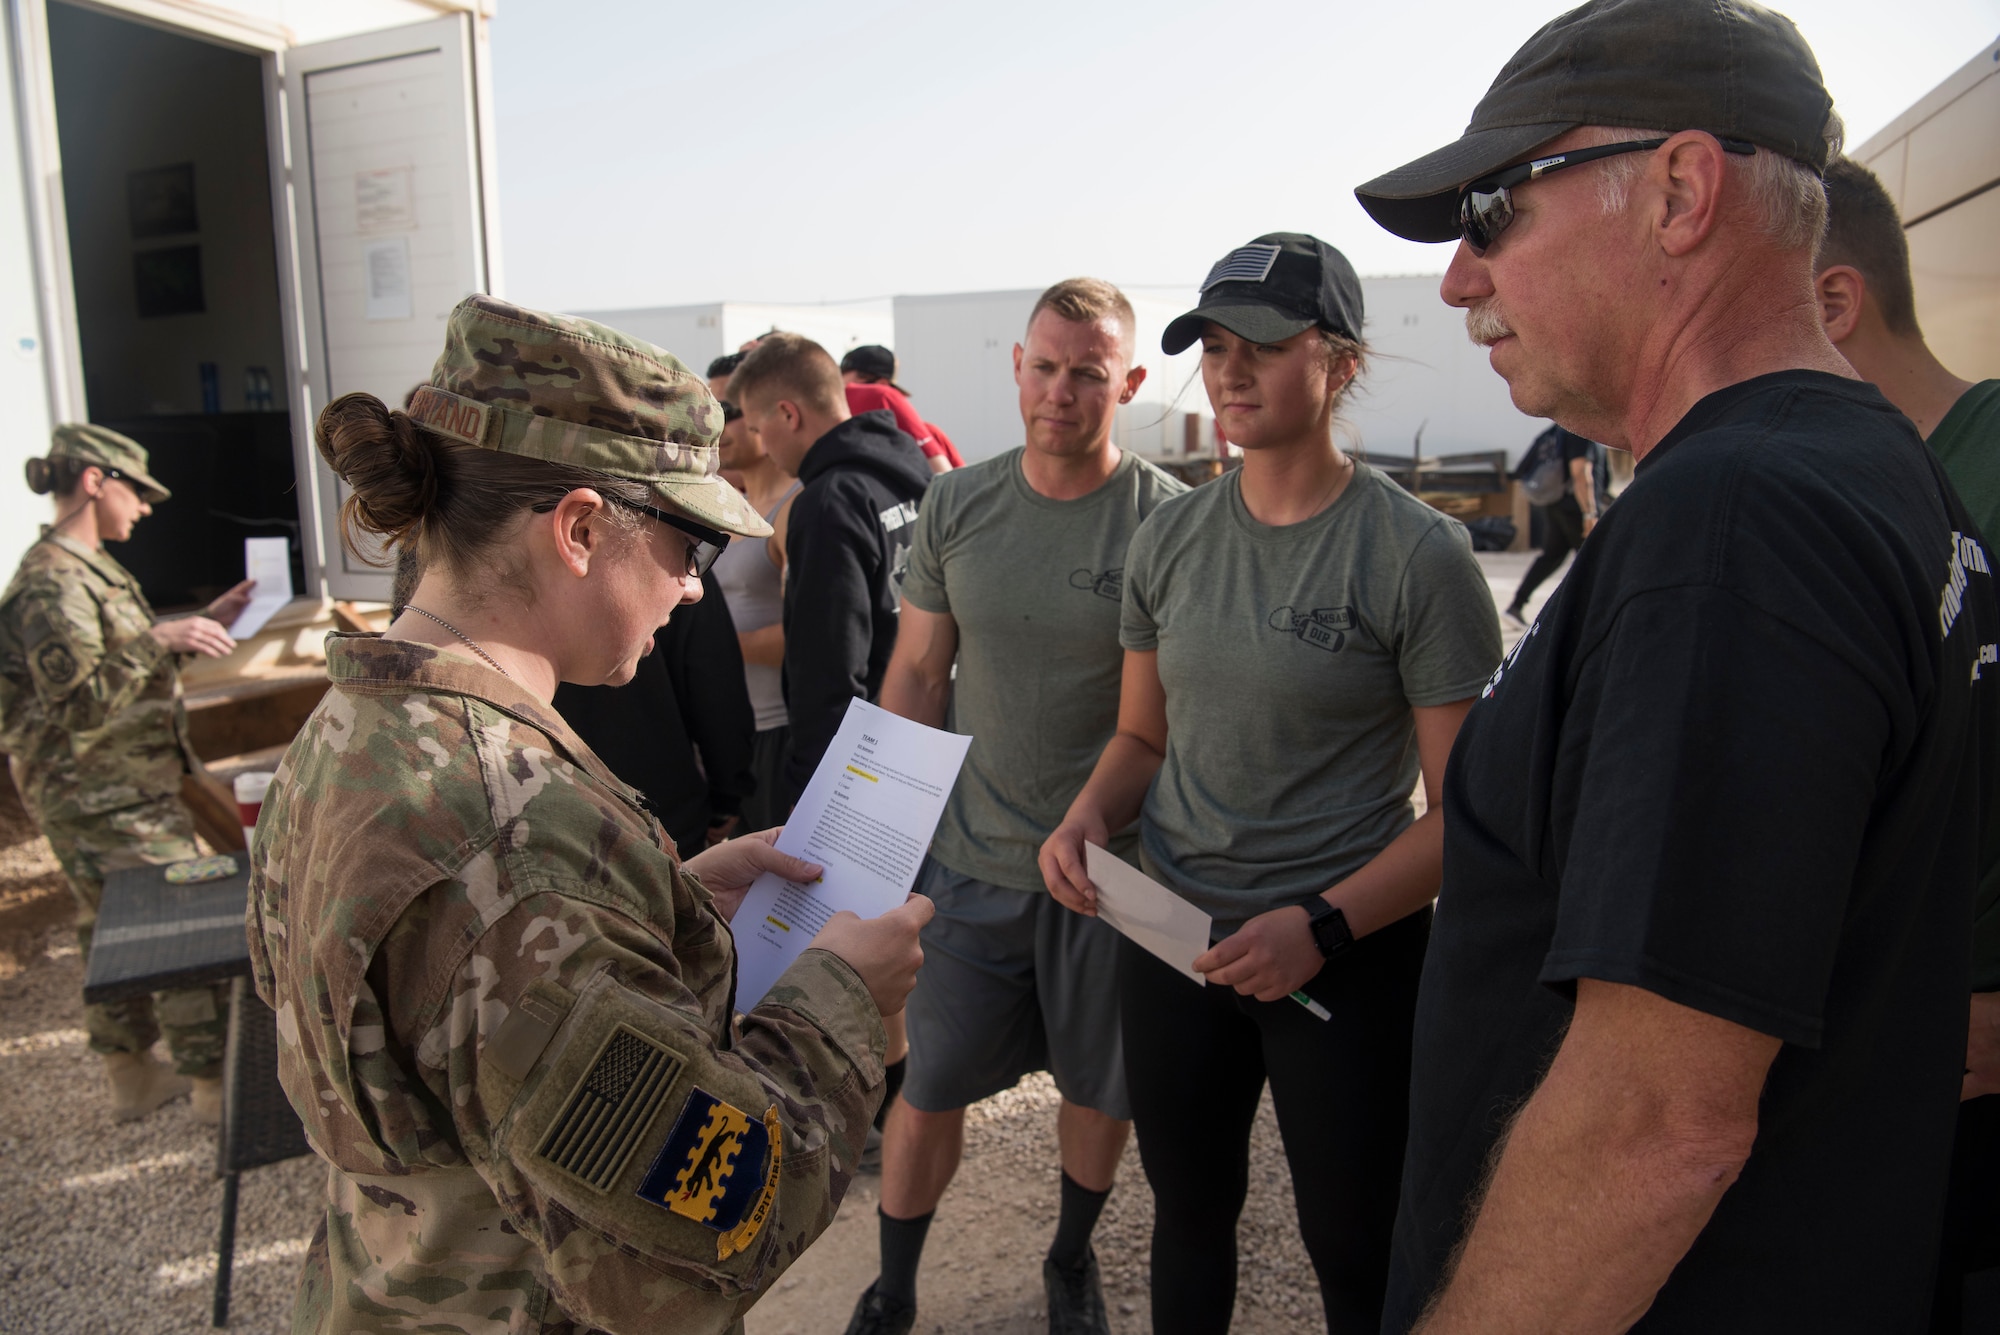 Master Sgt. Erin Pontbriand, 332nd Air Expeditionary Wing Equal Opportunity regional director, reads a scenario question to a team during the Commander’s Challenge at an undisclosed location in Southwest Asia May 4, 2018.